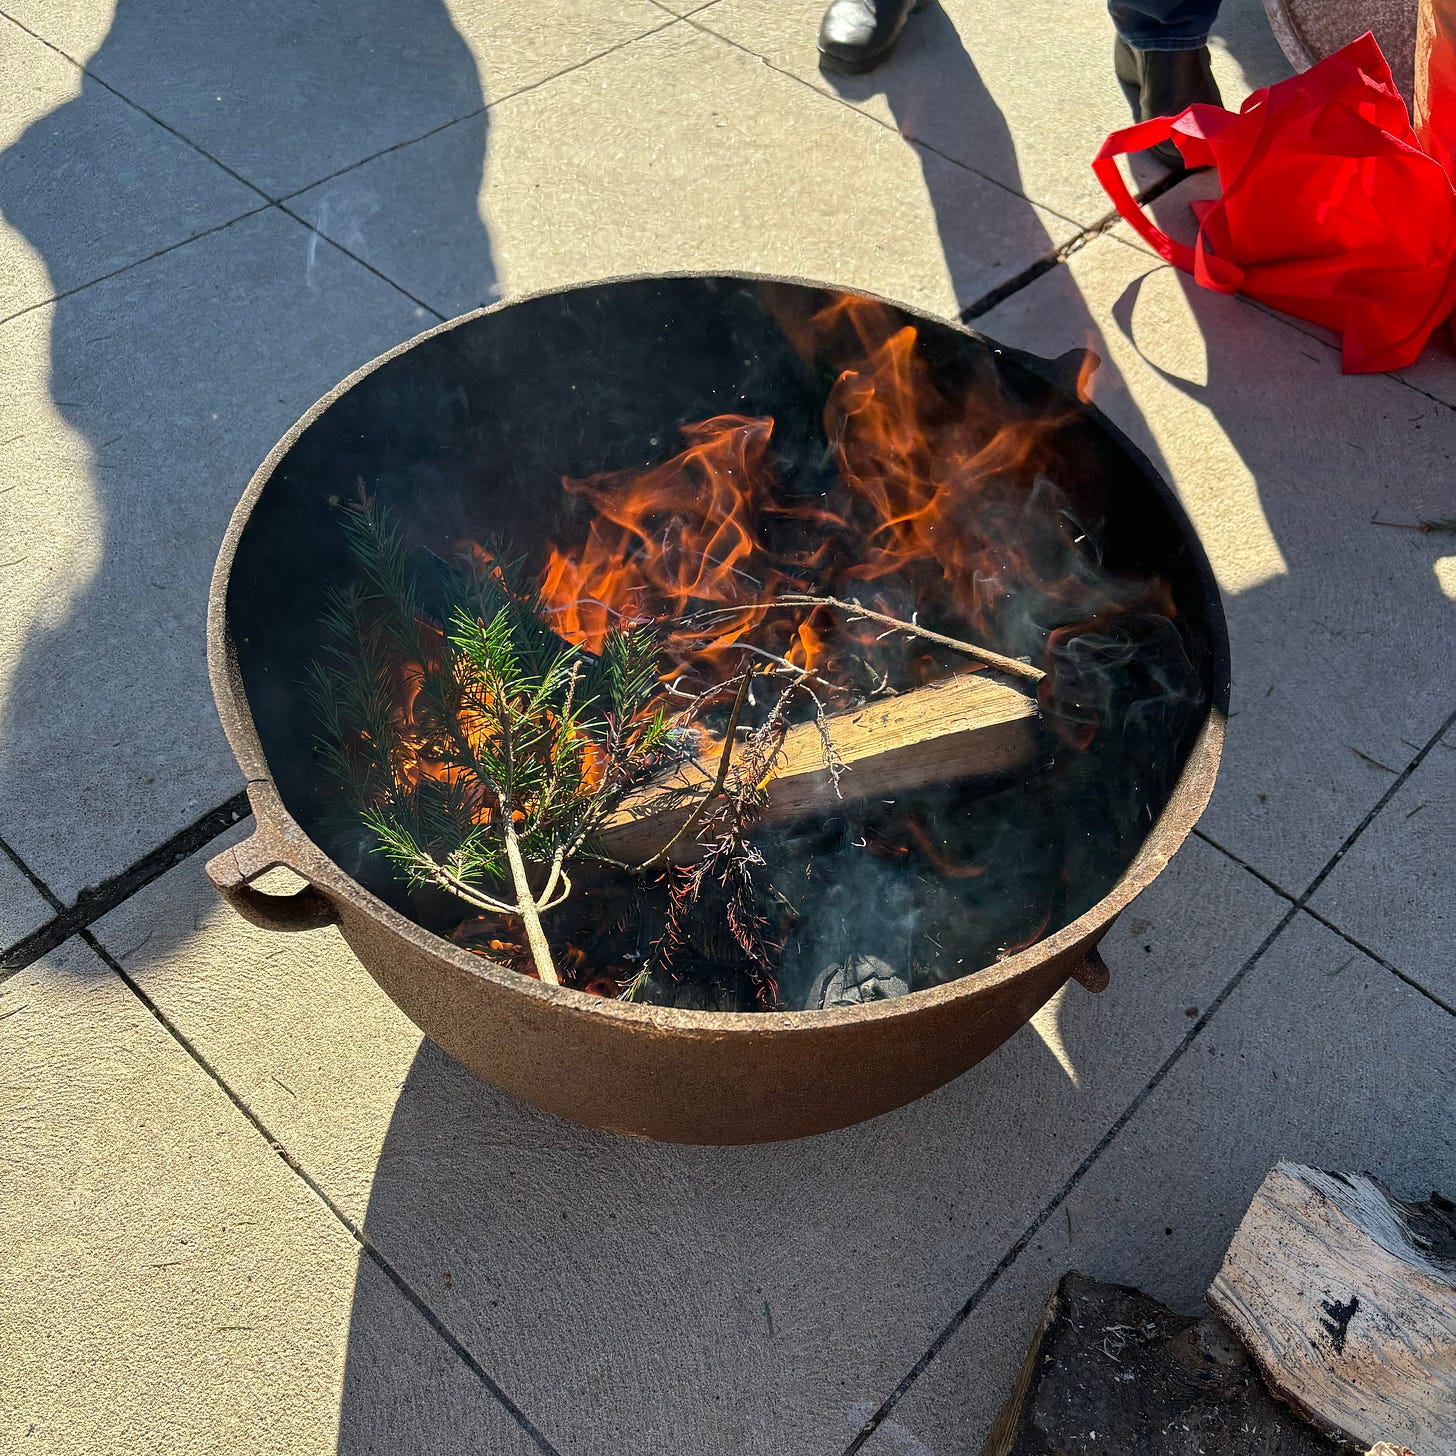 Burning evergreen branches